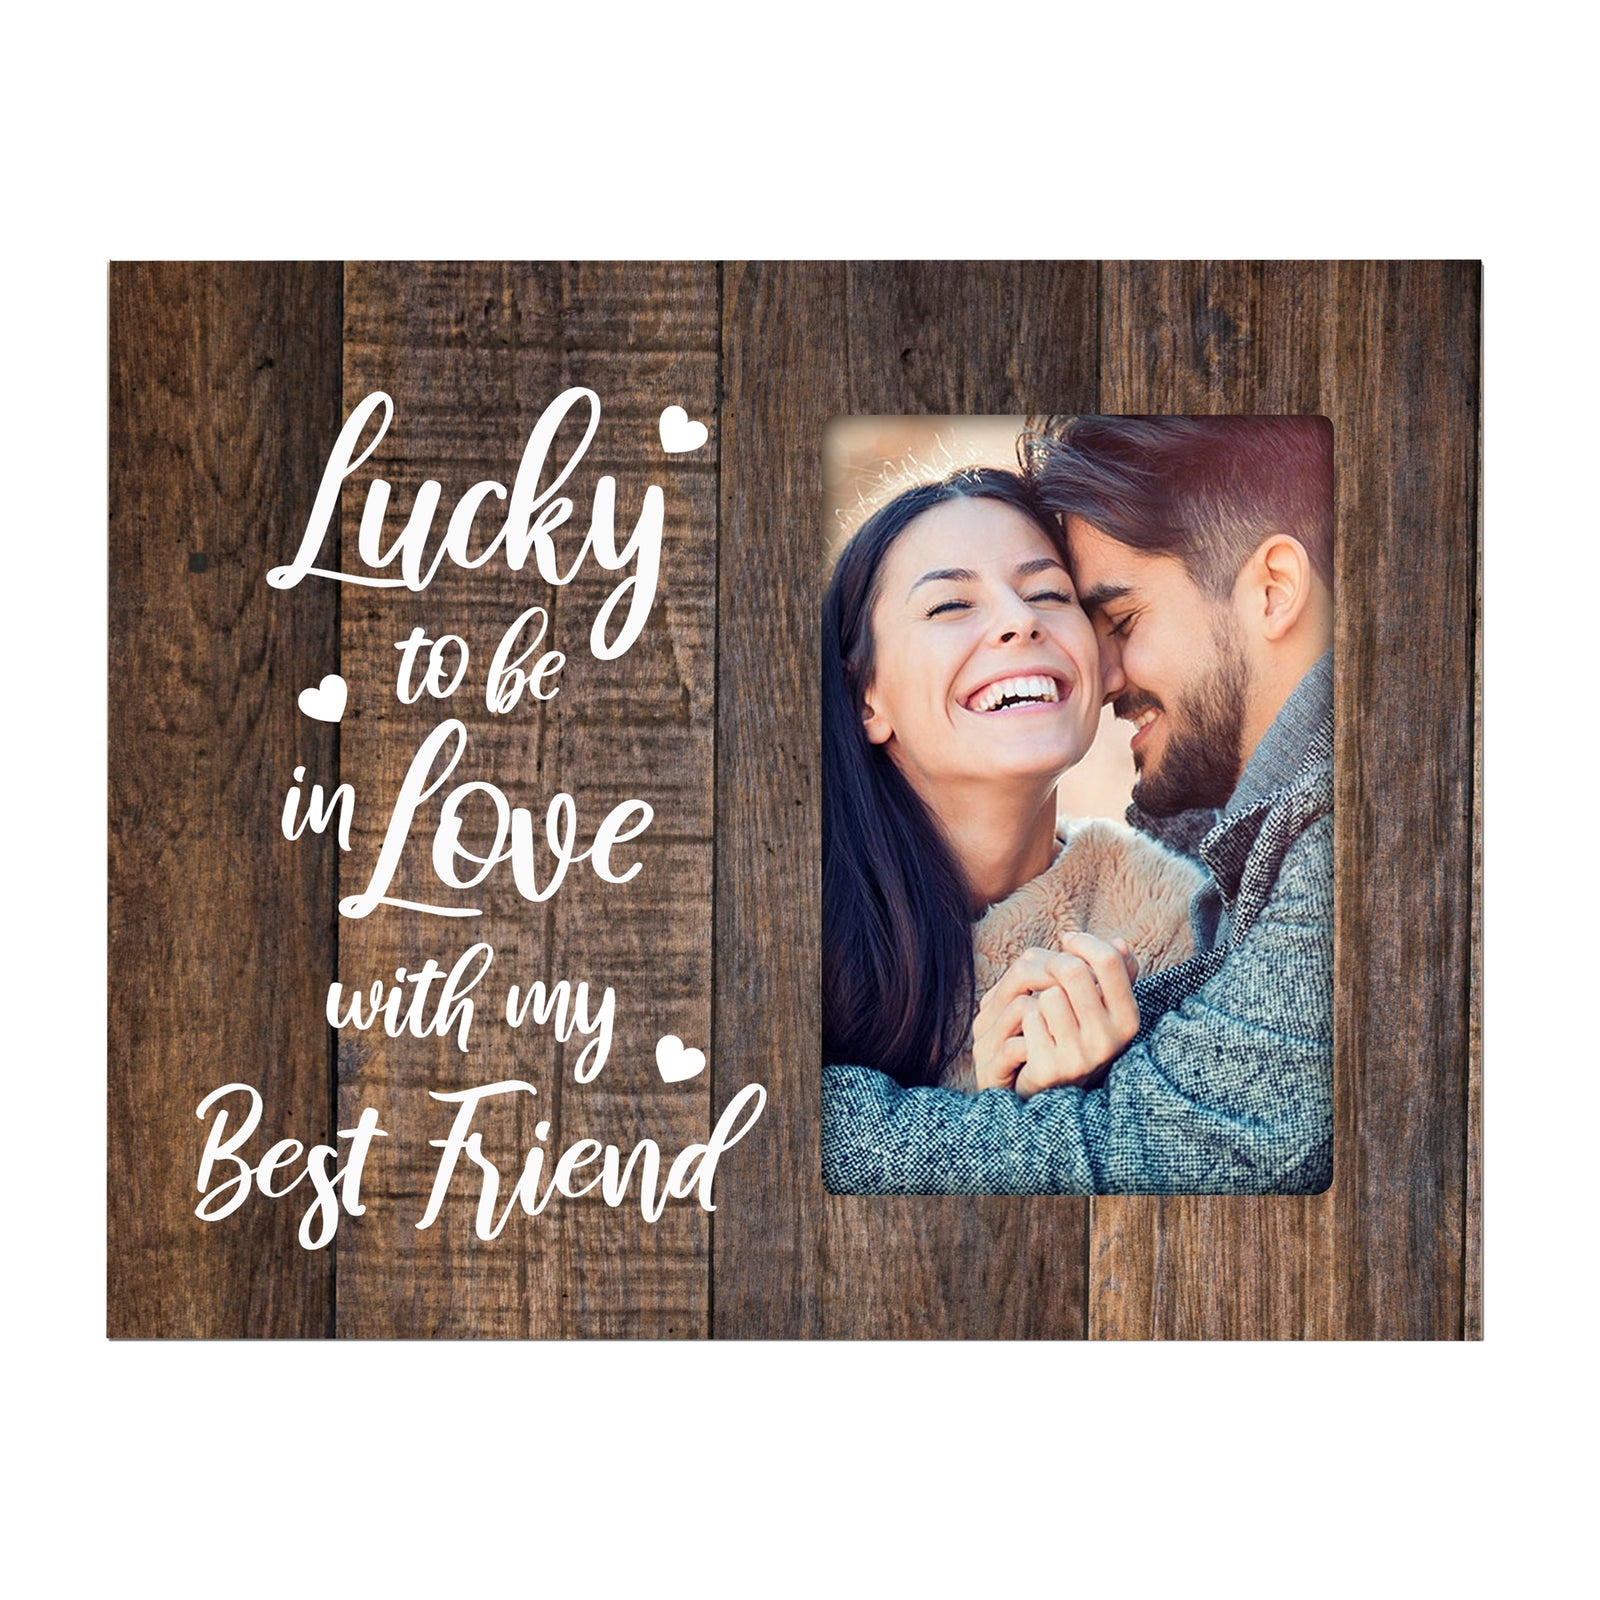 Wooden 8x10 Wedding Picture Frame Holds 4x6 Photo - Lucky To Be In Love